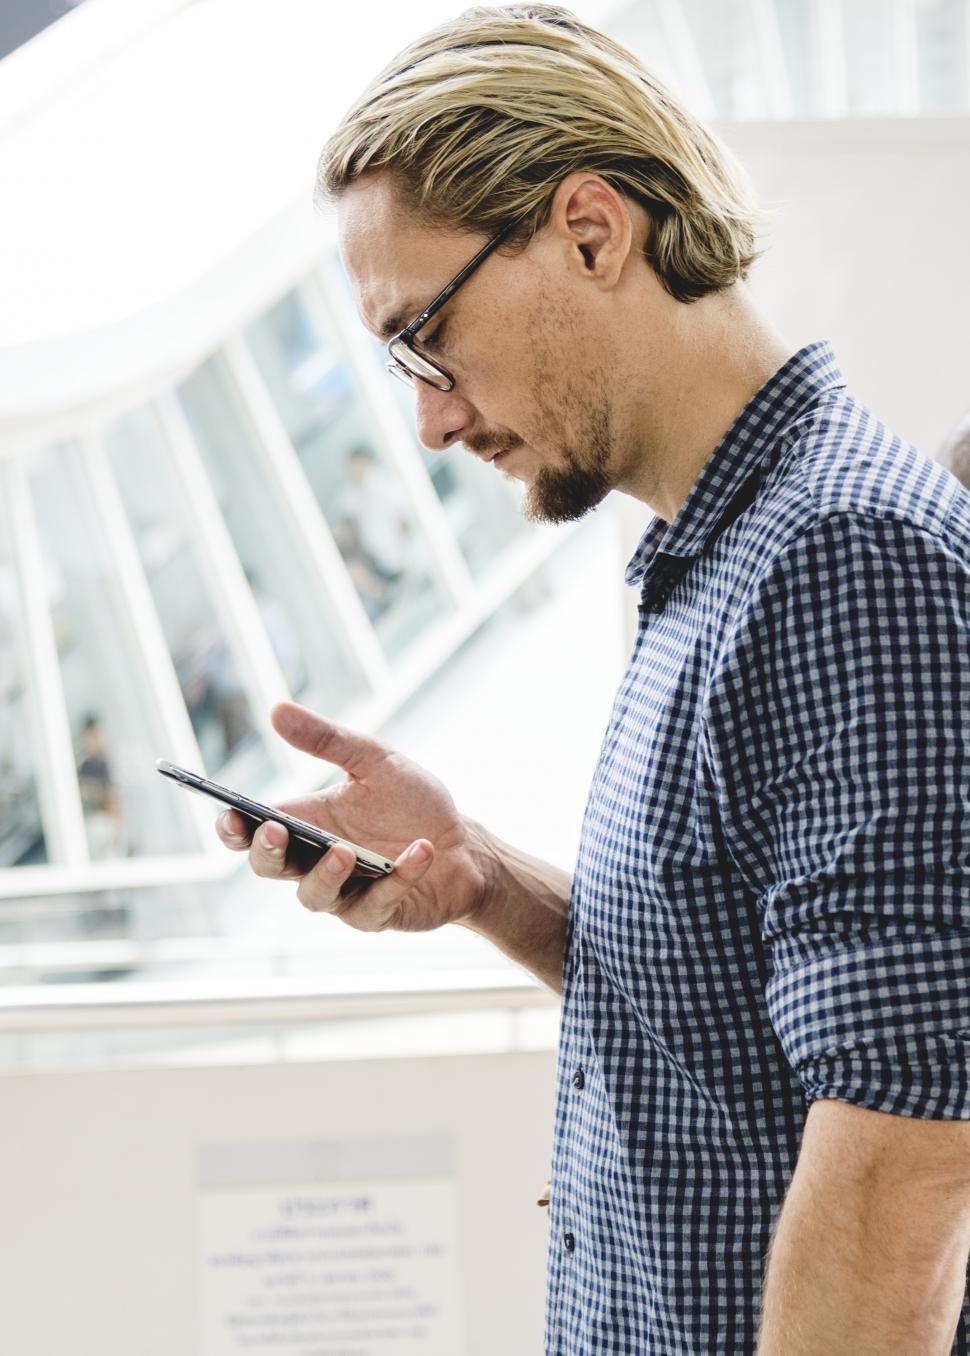 Free Image of A bearded Caucasian man looking at his mobile phone 